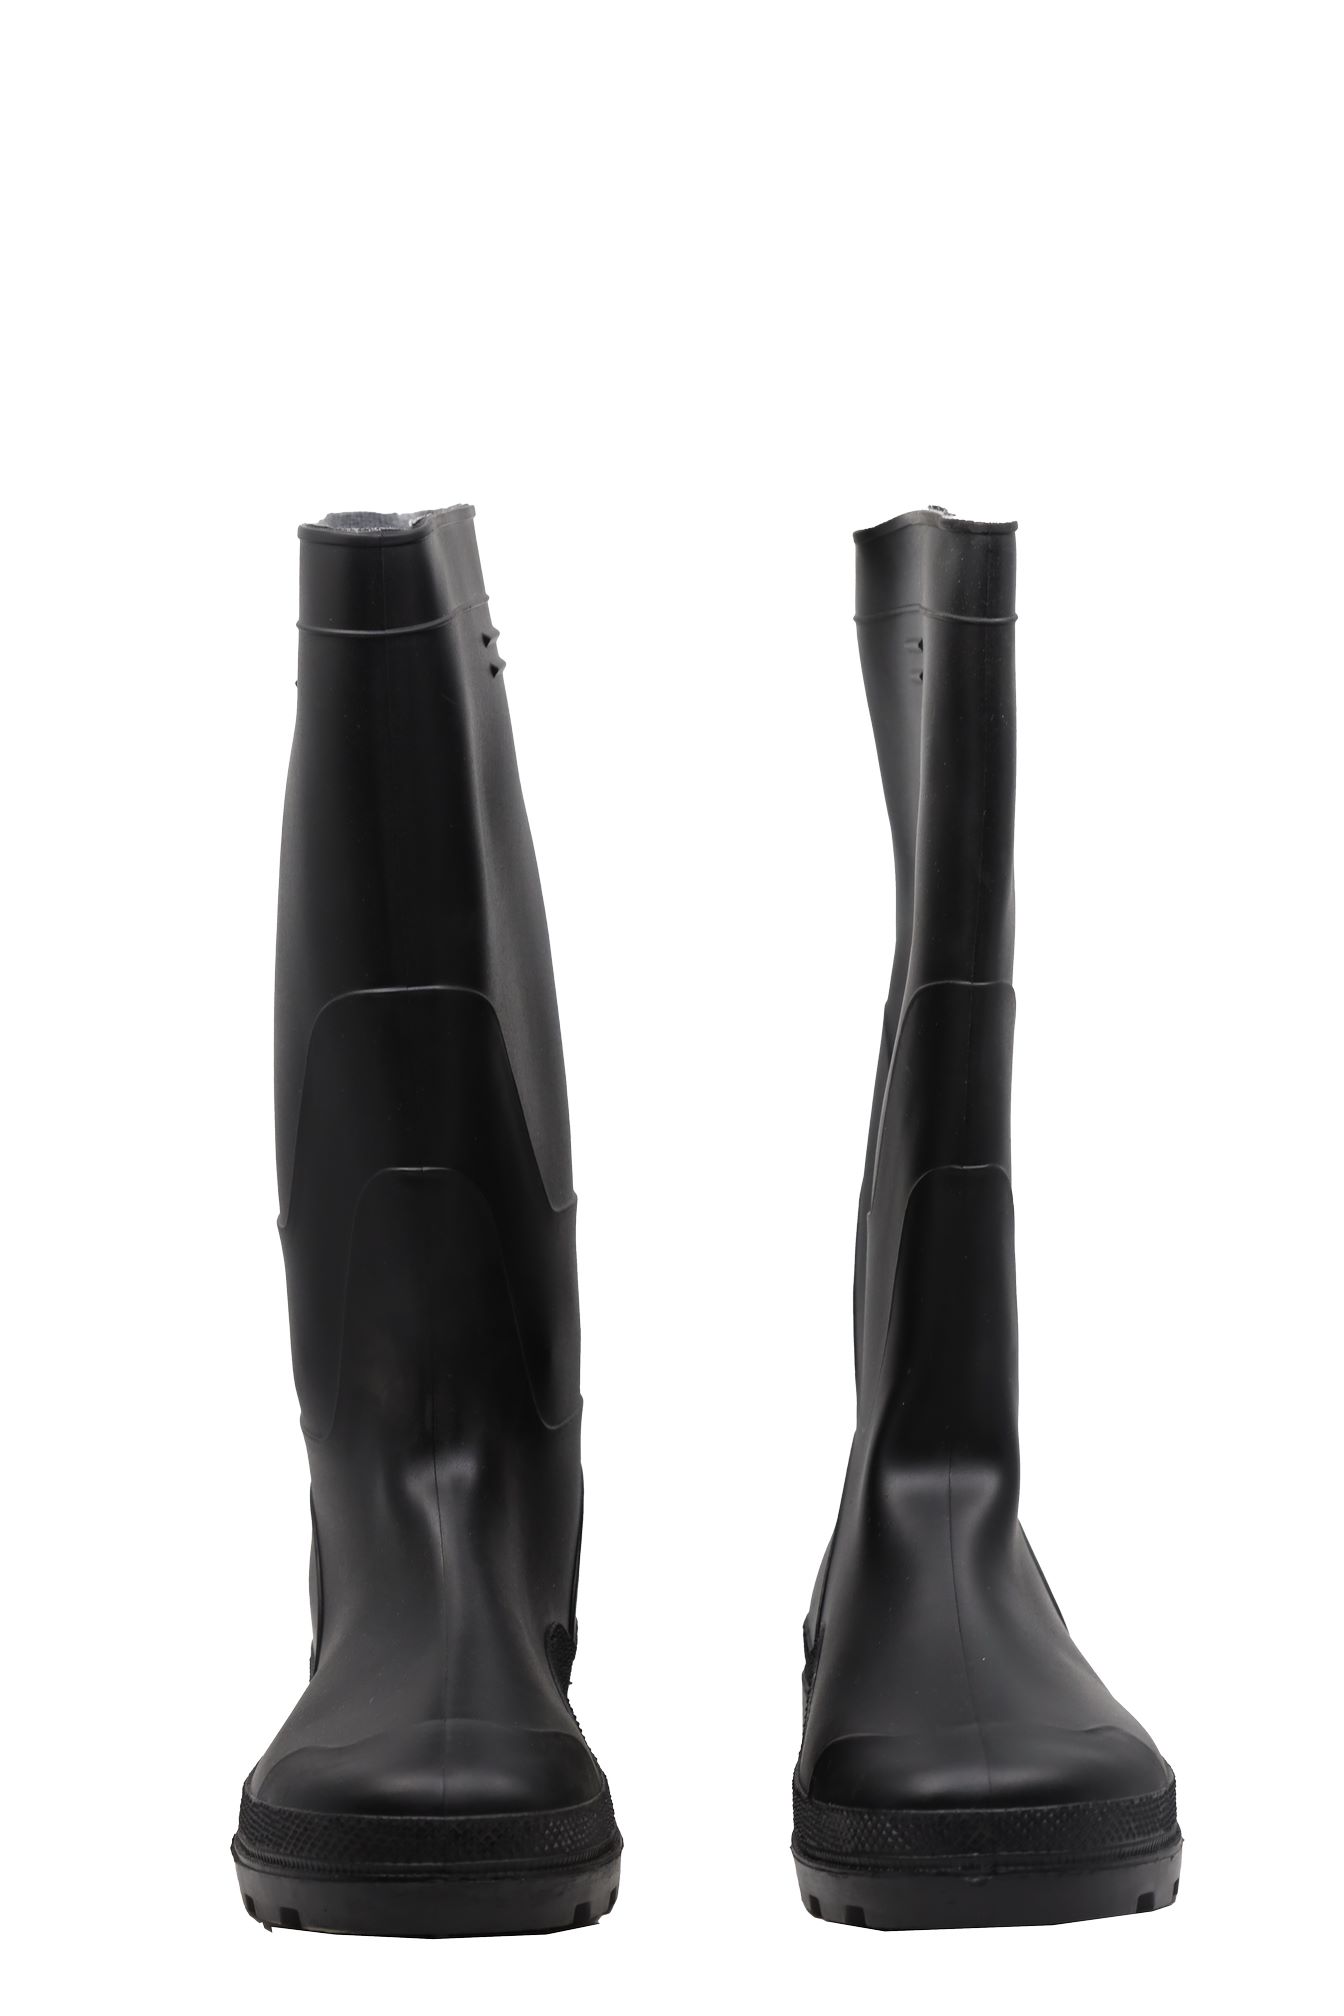 Buy RUBBER BOOTS - SIZE 43 - ITALY Online | Safety | Qetaat.com